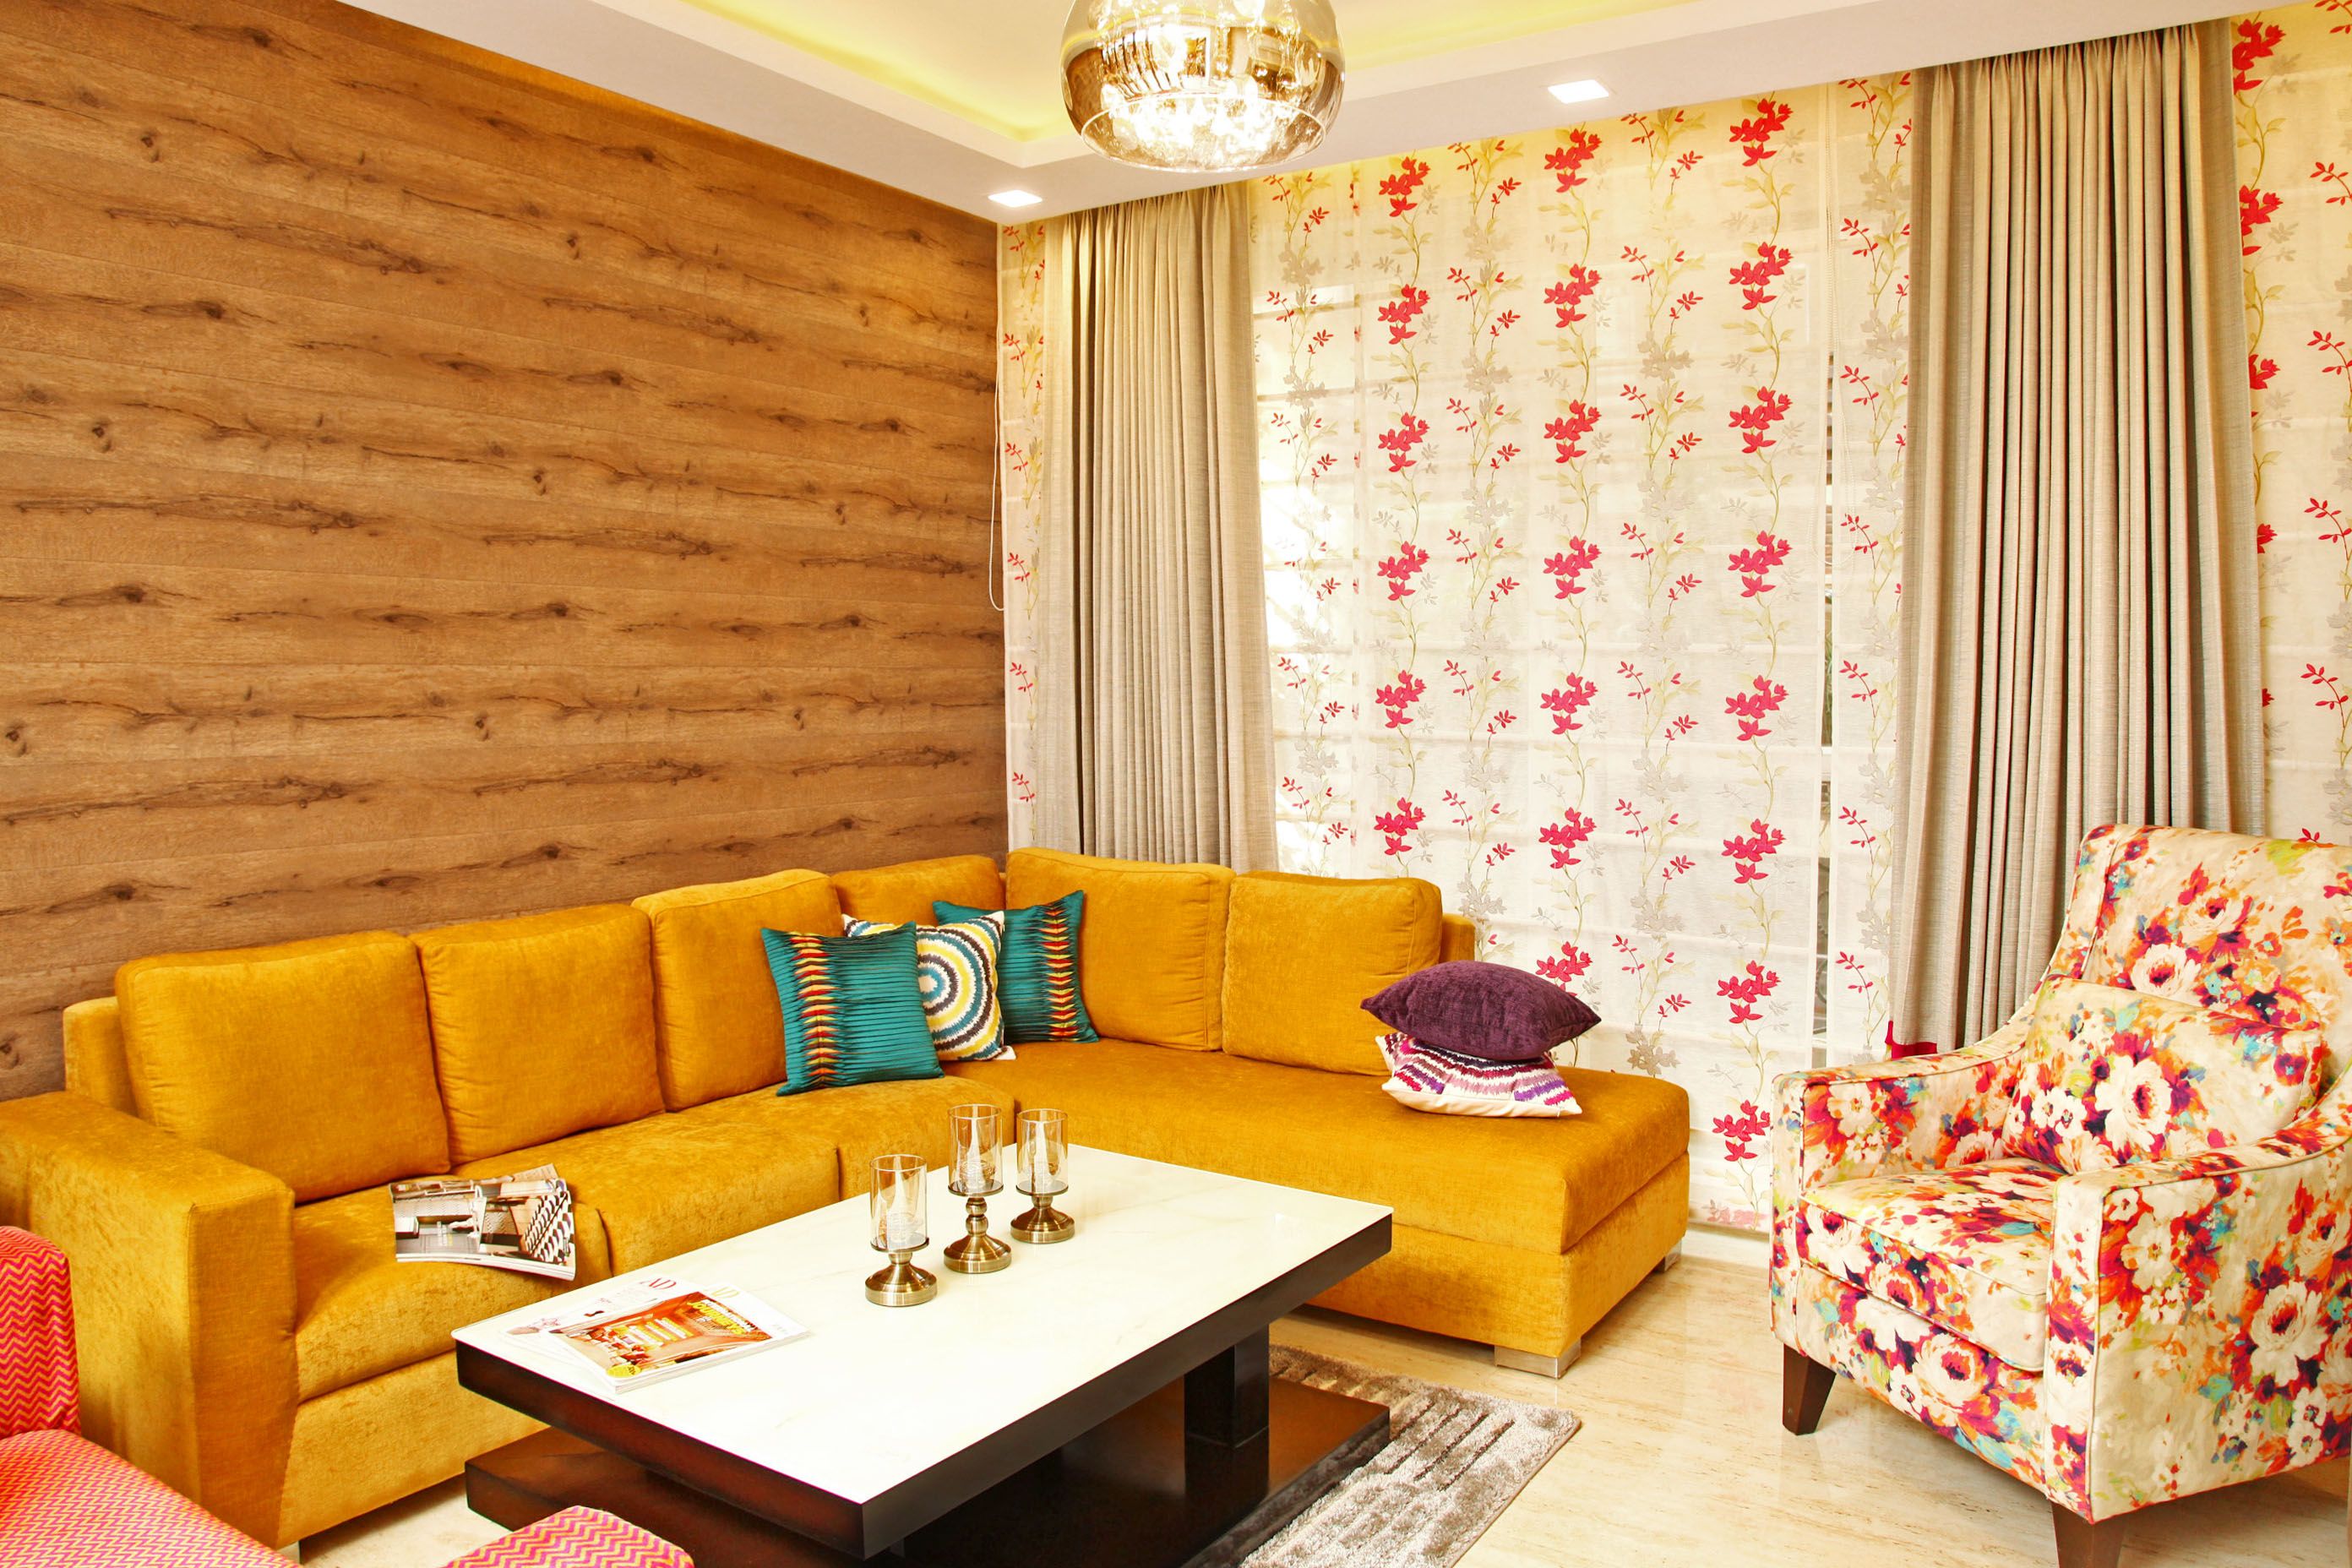 Eclectic Living Room Design With Yellow L-Shaped Sofa And Wooden Accent Wall